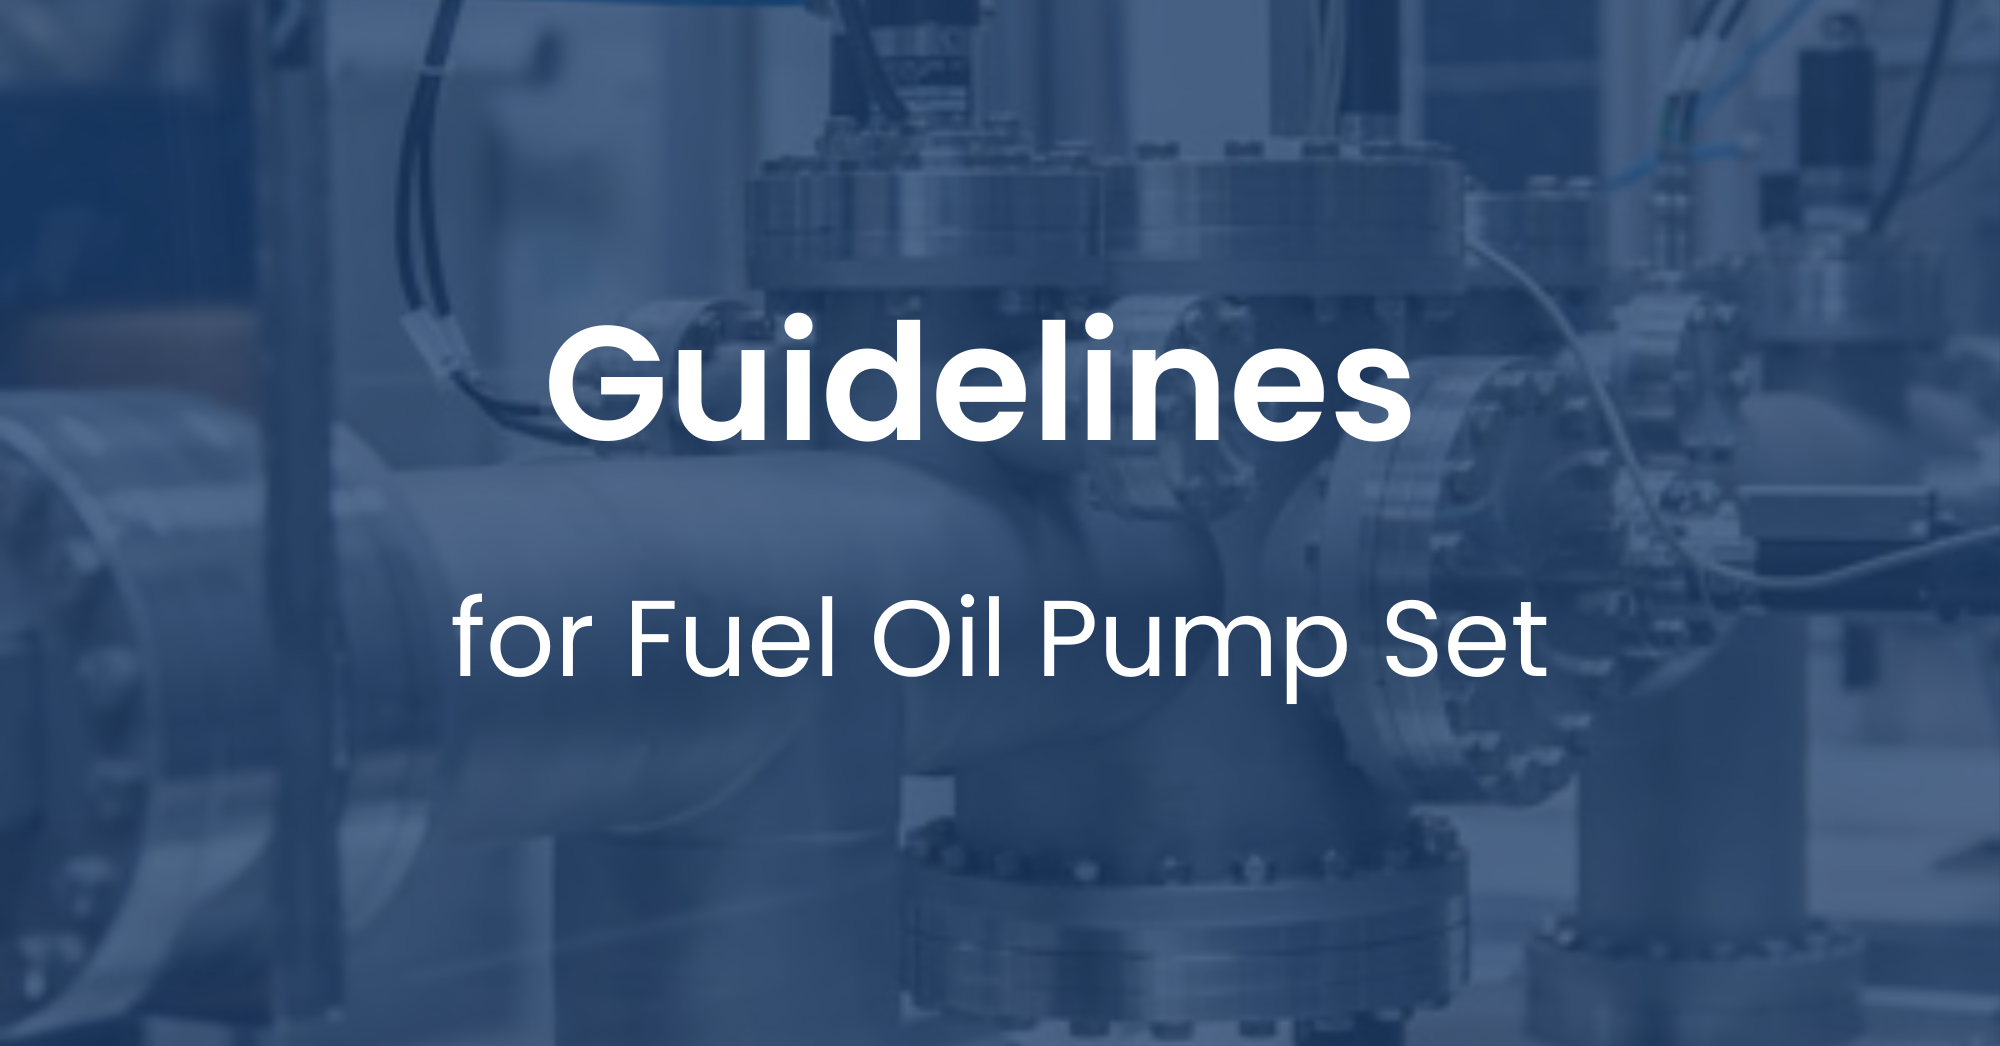 A Complete Guide on How to Select Oil Transfer Pump for Diesel